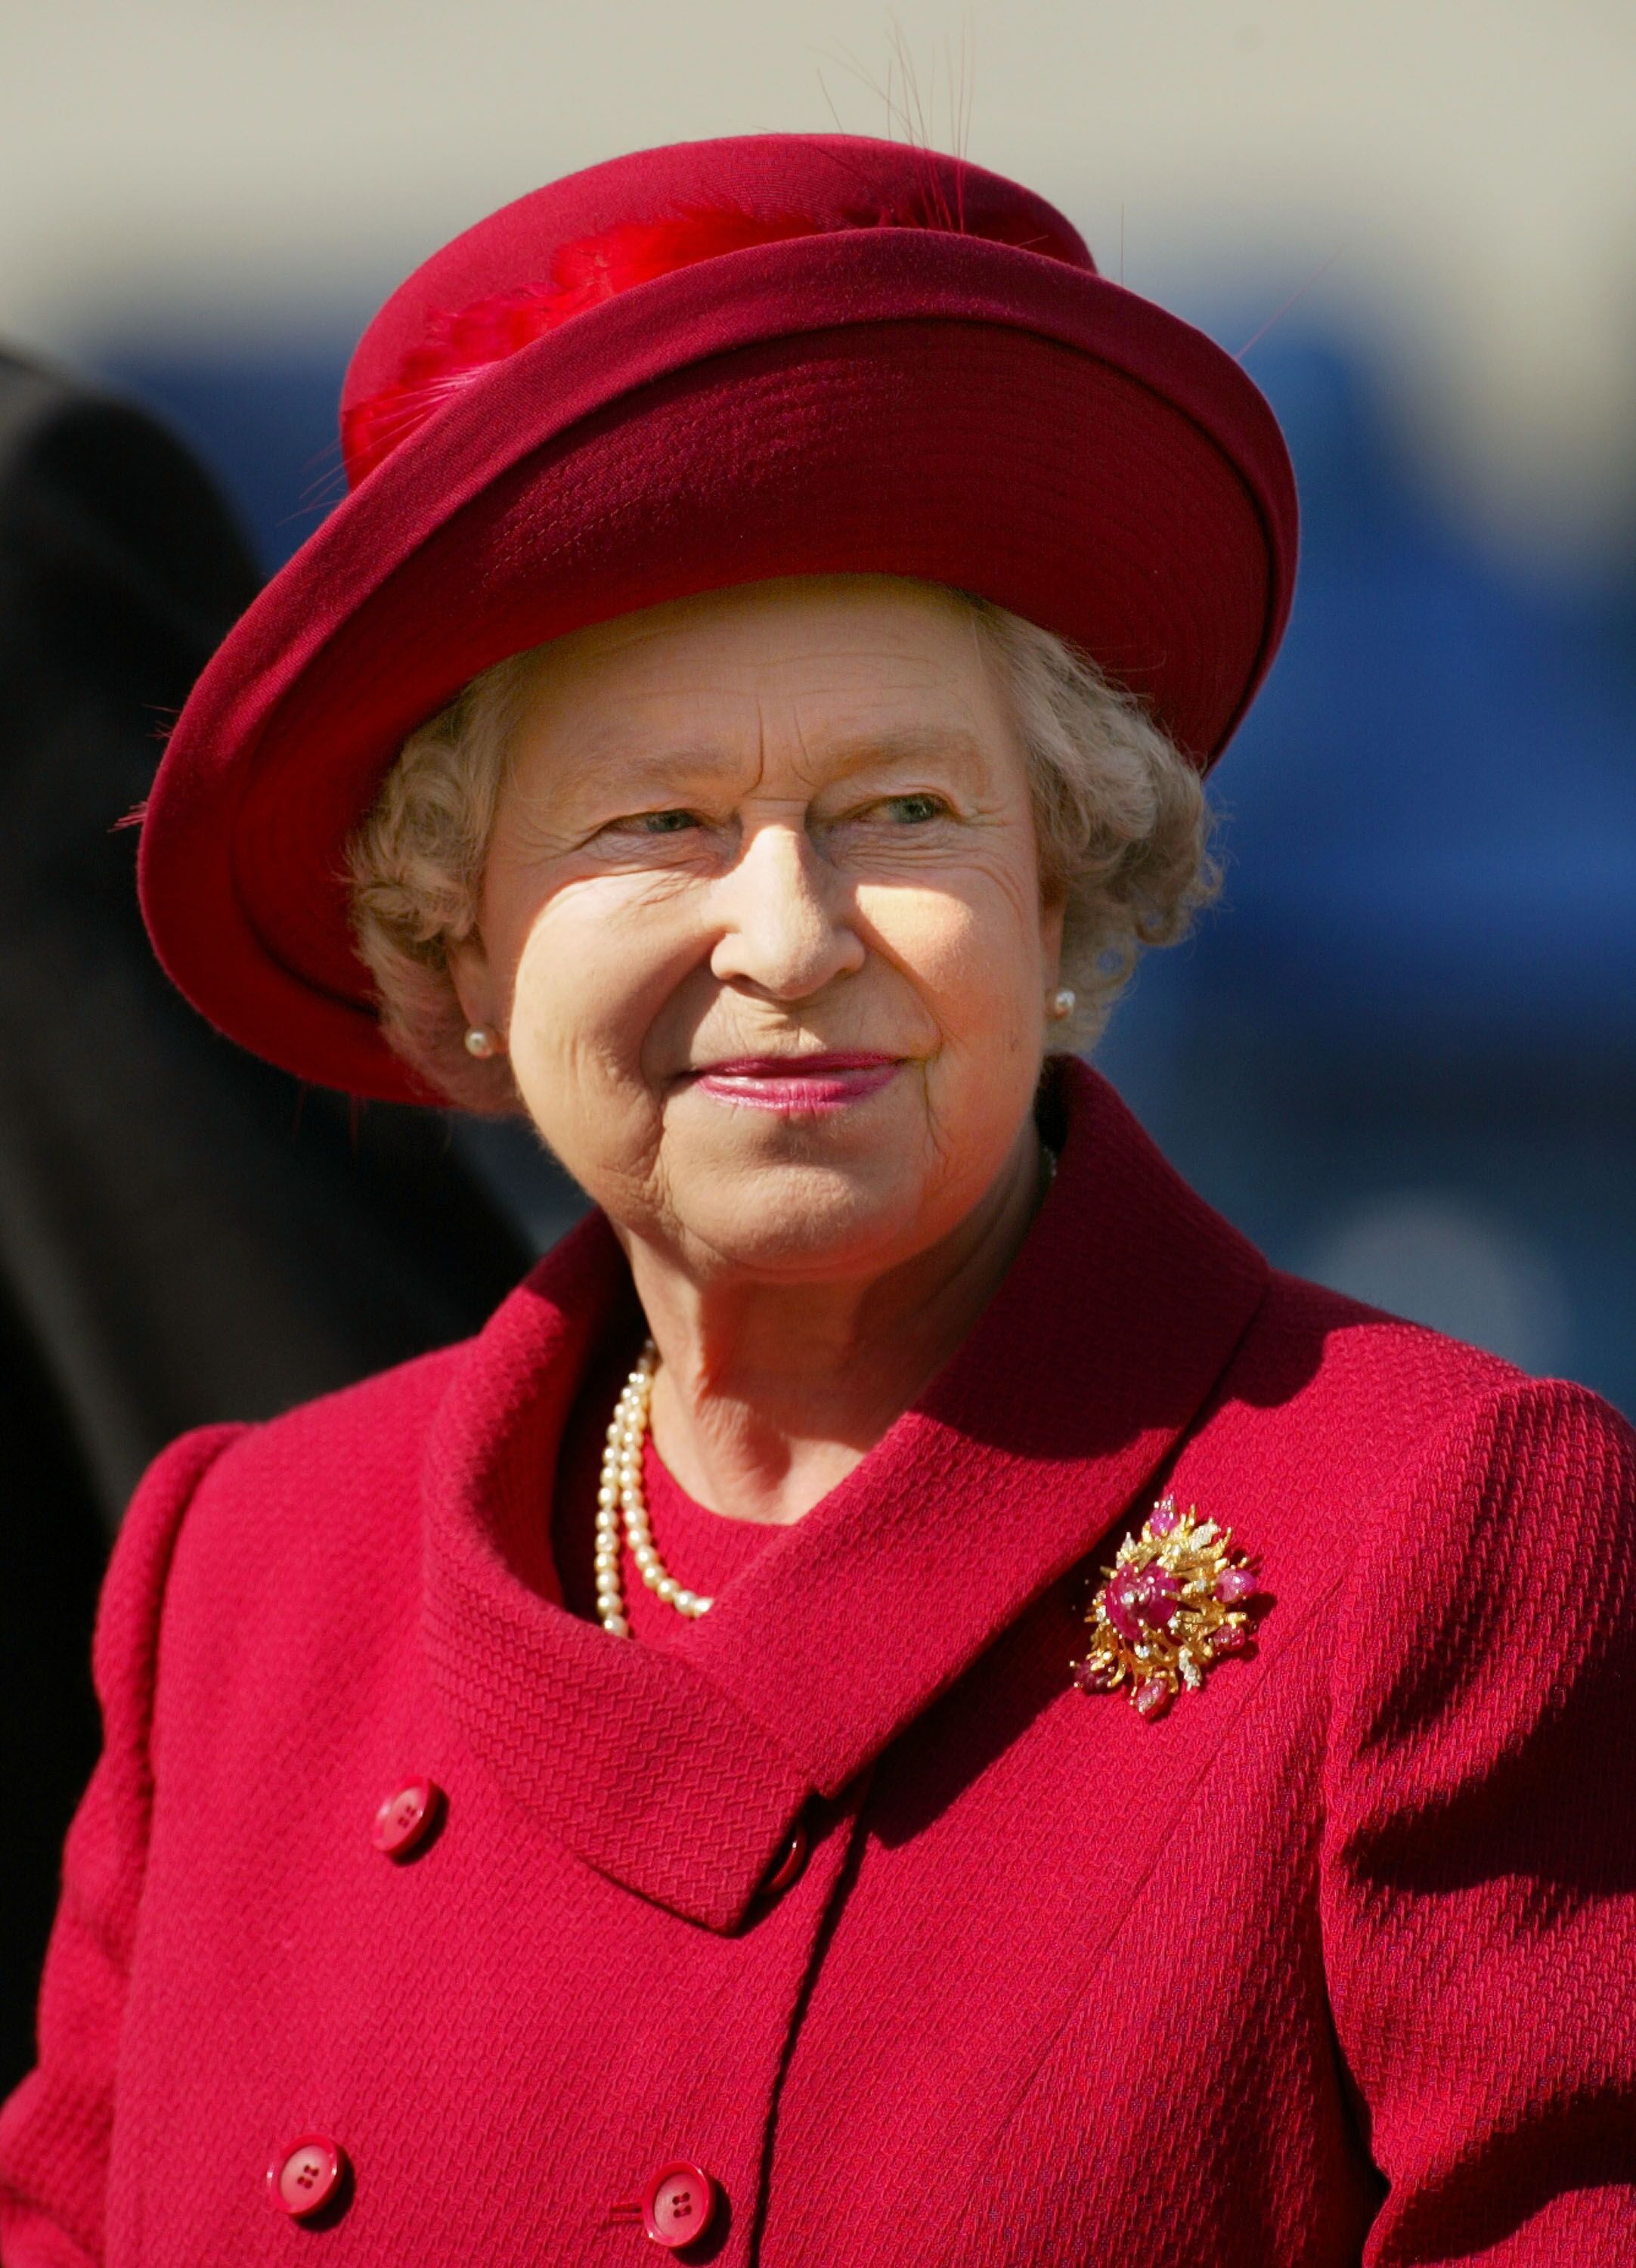 Queen Elizabeth smiles May 18, 2002 after presenting a trophy for the "best turned out trooper" to a Household Cavalry soldier at The Royal Windsor Horse Show at Windsor Great Park, England. | Source: Getty Images